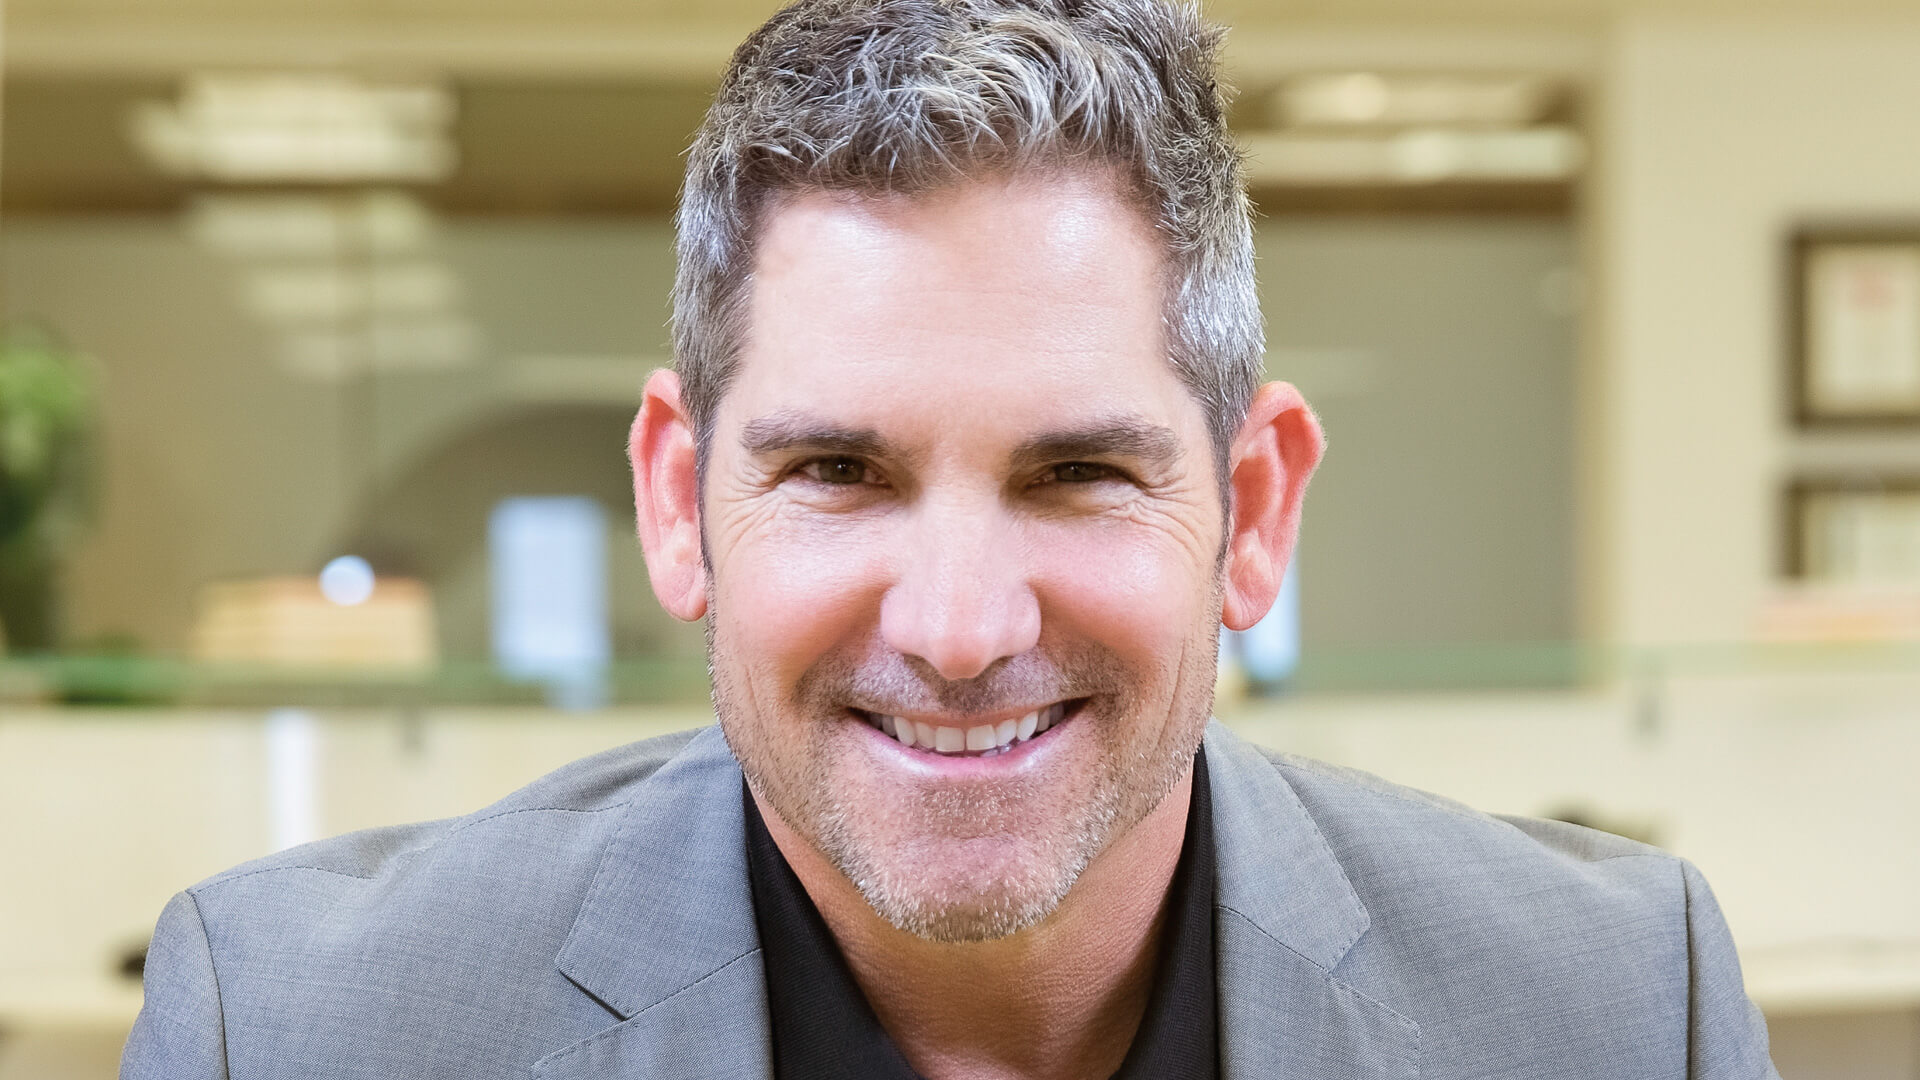 Grant Cardone Says Passive Income Is the Key To Building Wealth: Here’s His No. 1 Way To Get It